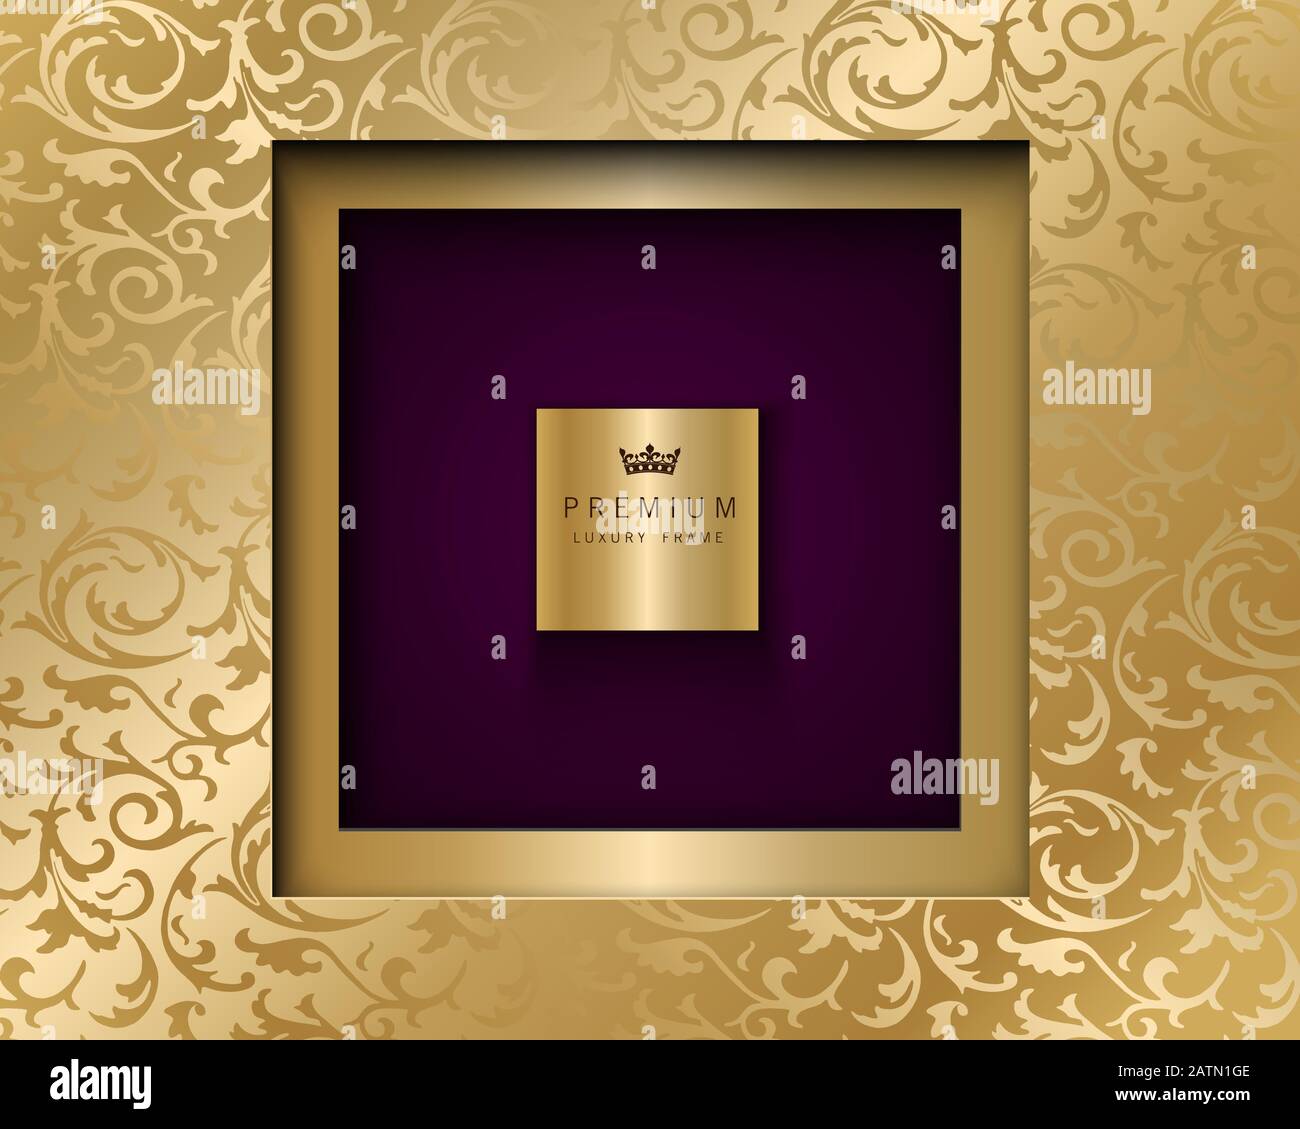 Vector luxury vintage square frame golden background. Vip invitation or announcement card paper cut design. Gold floral pattern and purple color Stock Vector